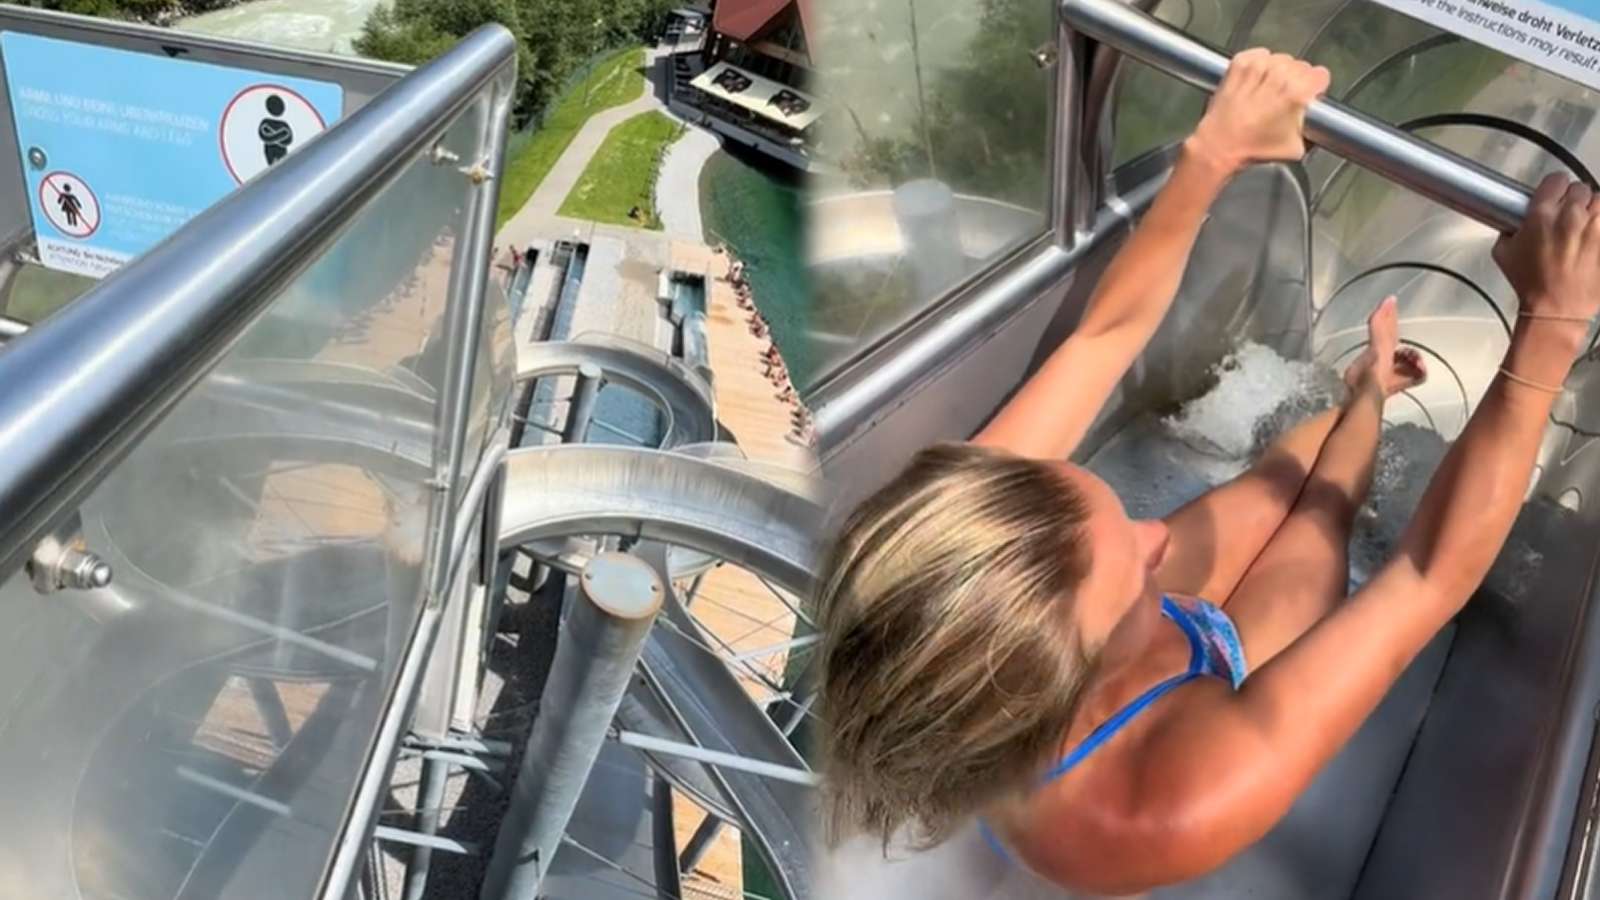 rhiannan iffland takes on the waterslide that forbids women